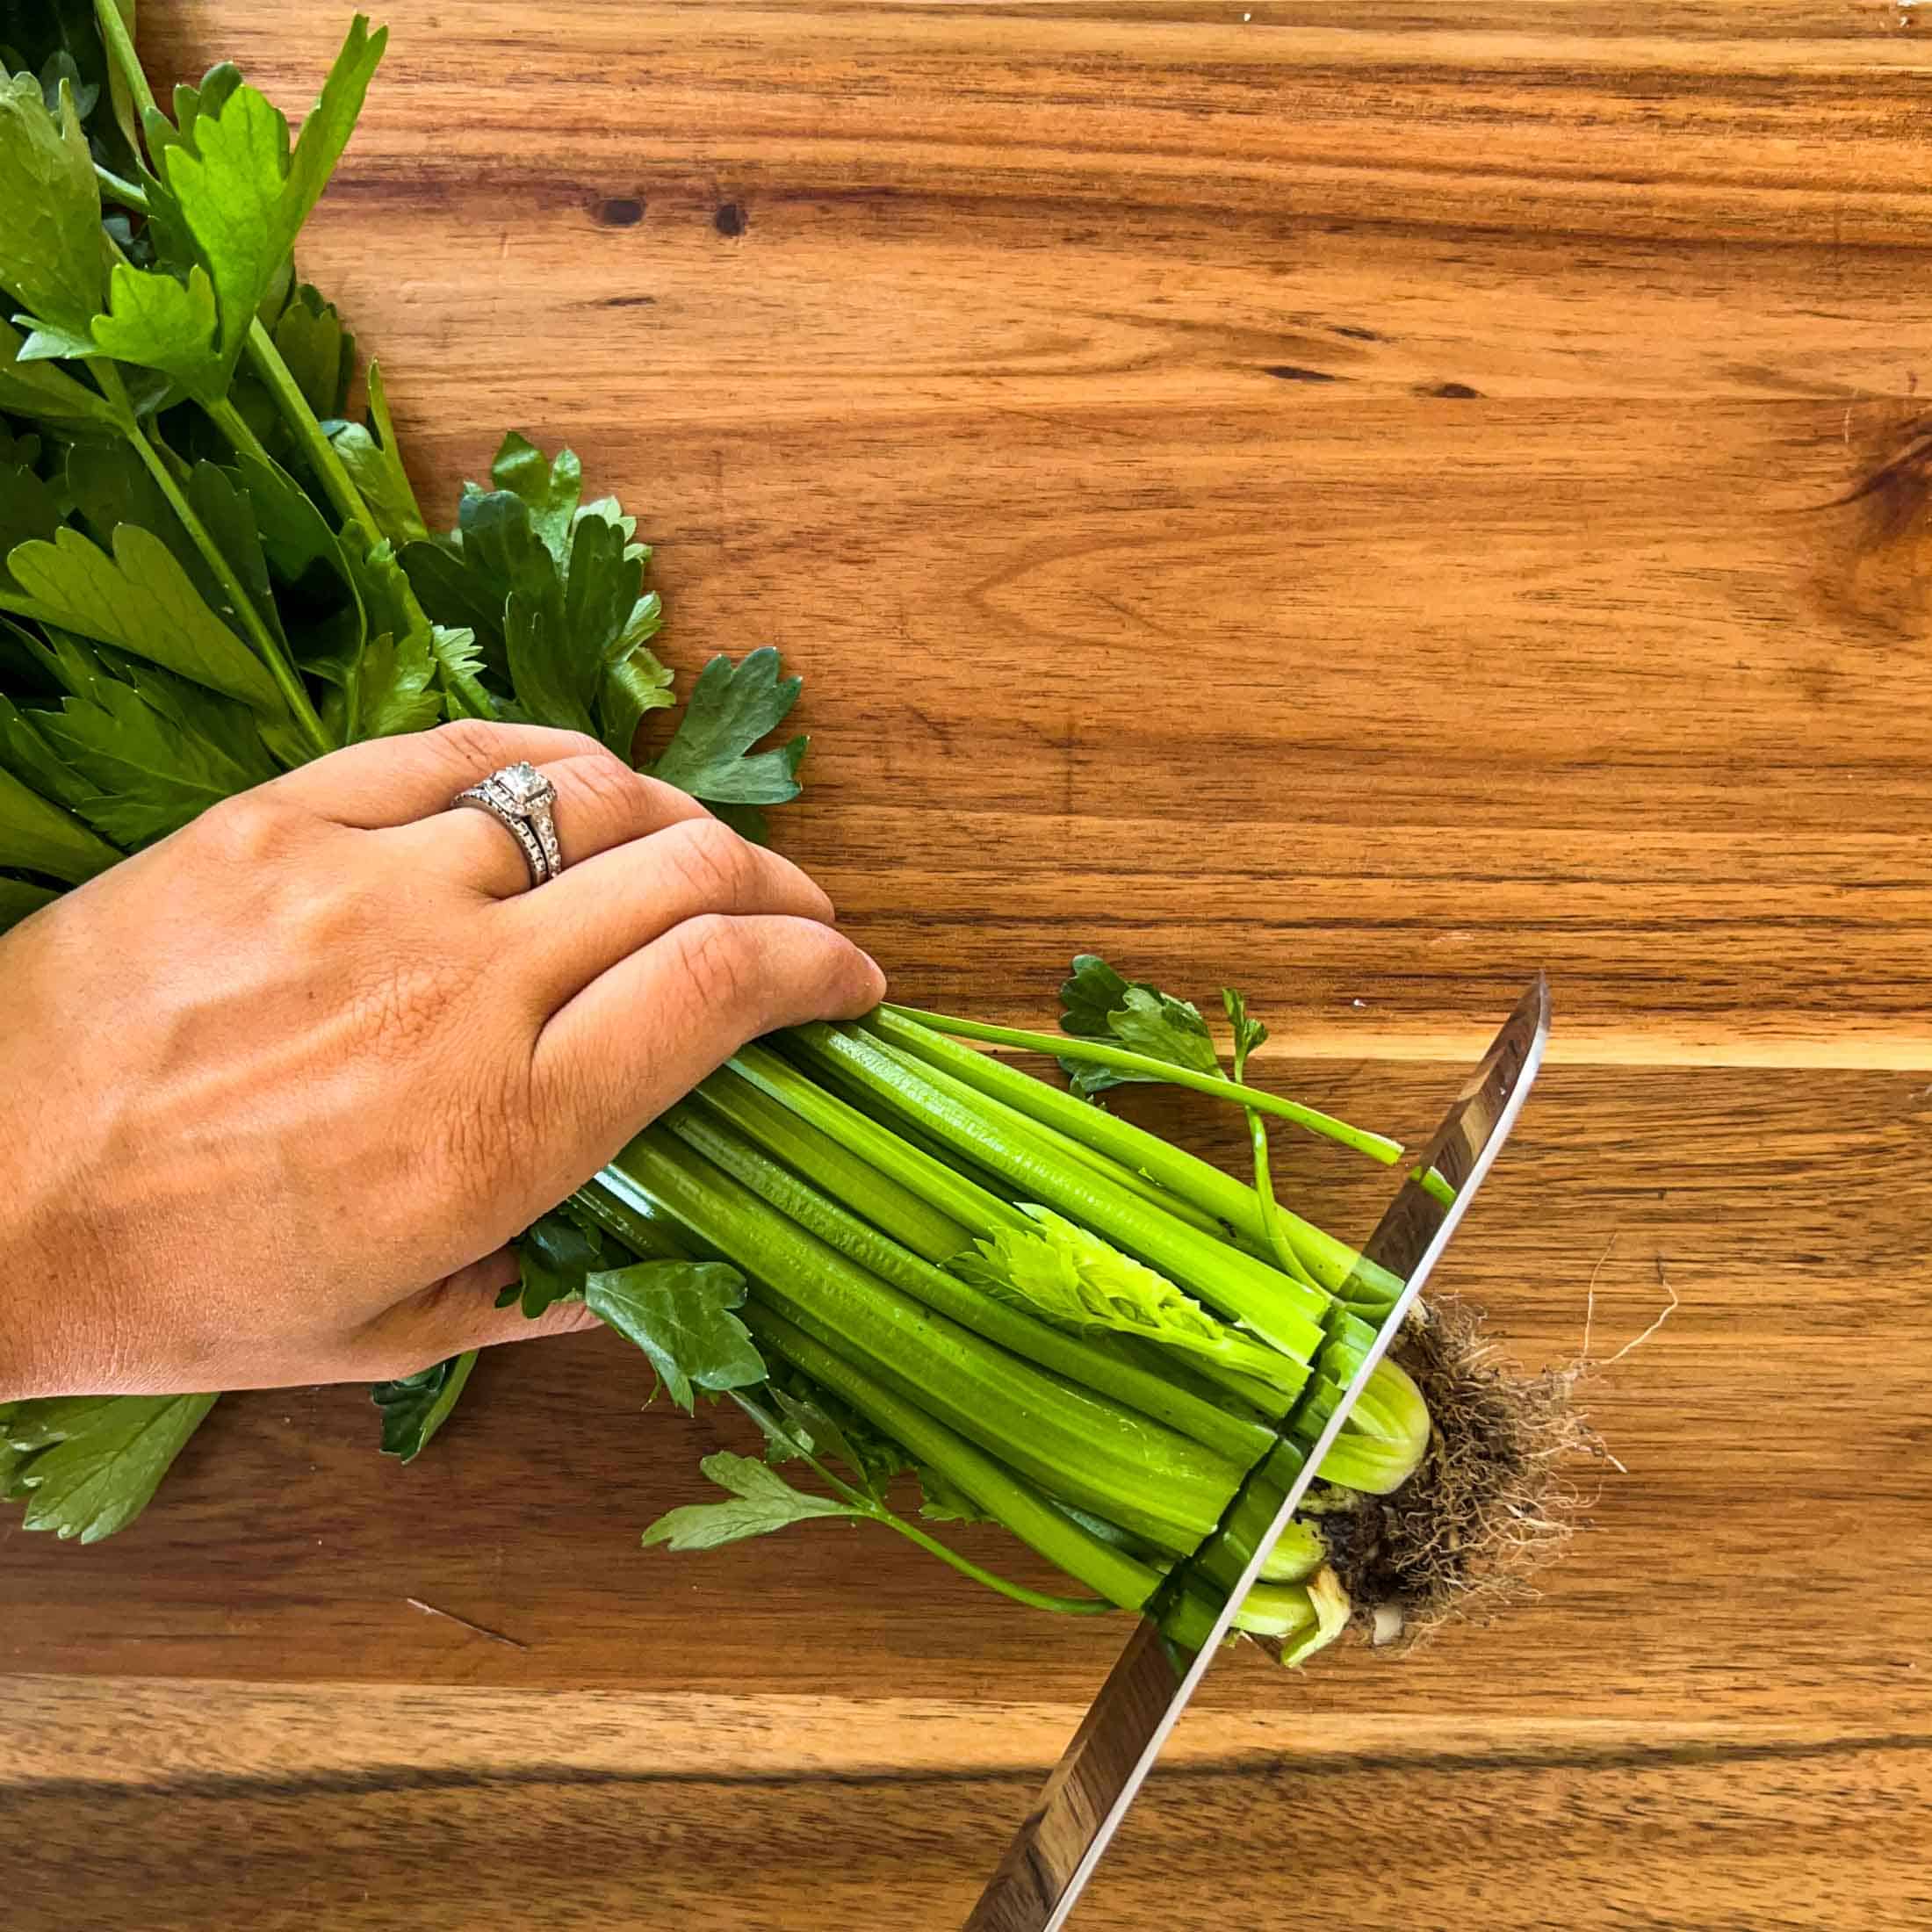 A large chef's knife cutting into a bundle of celery, chopping the bottom portion off.